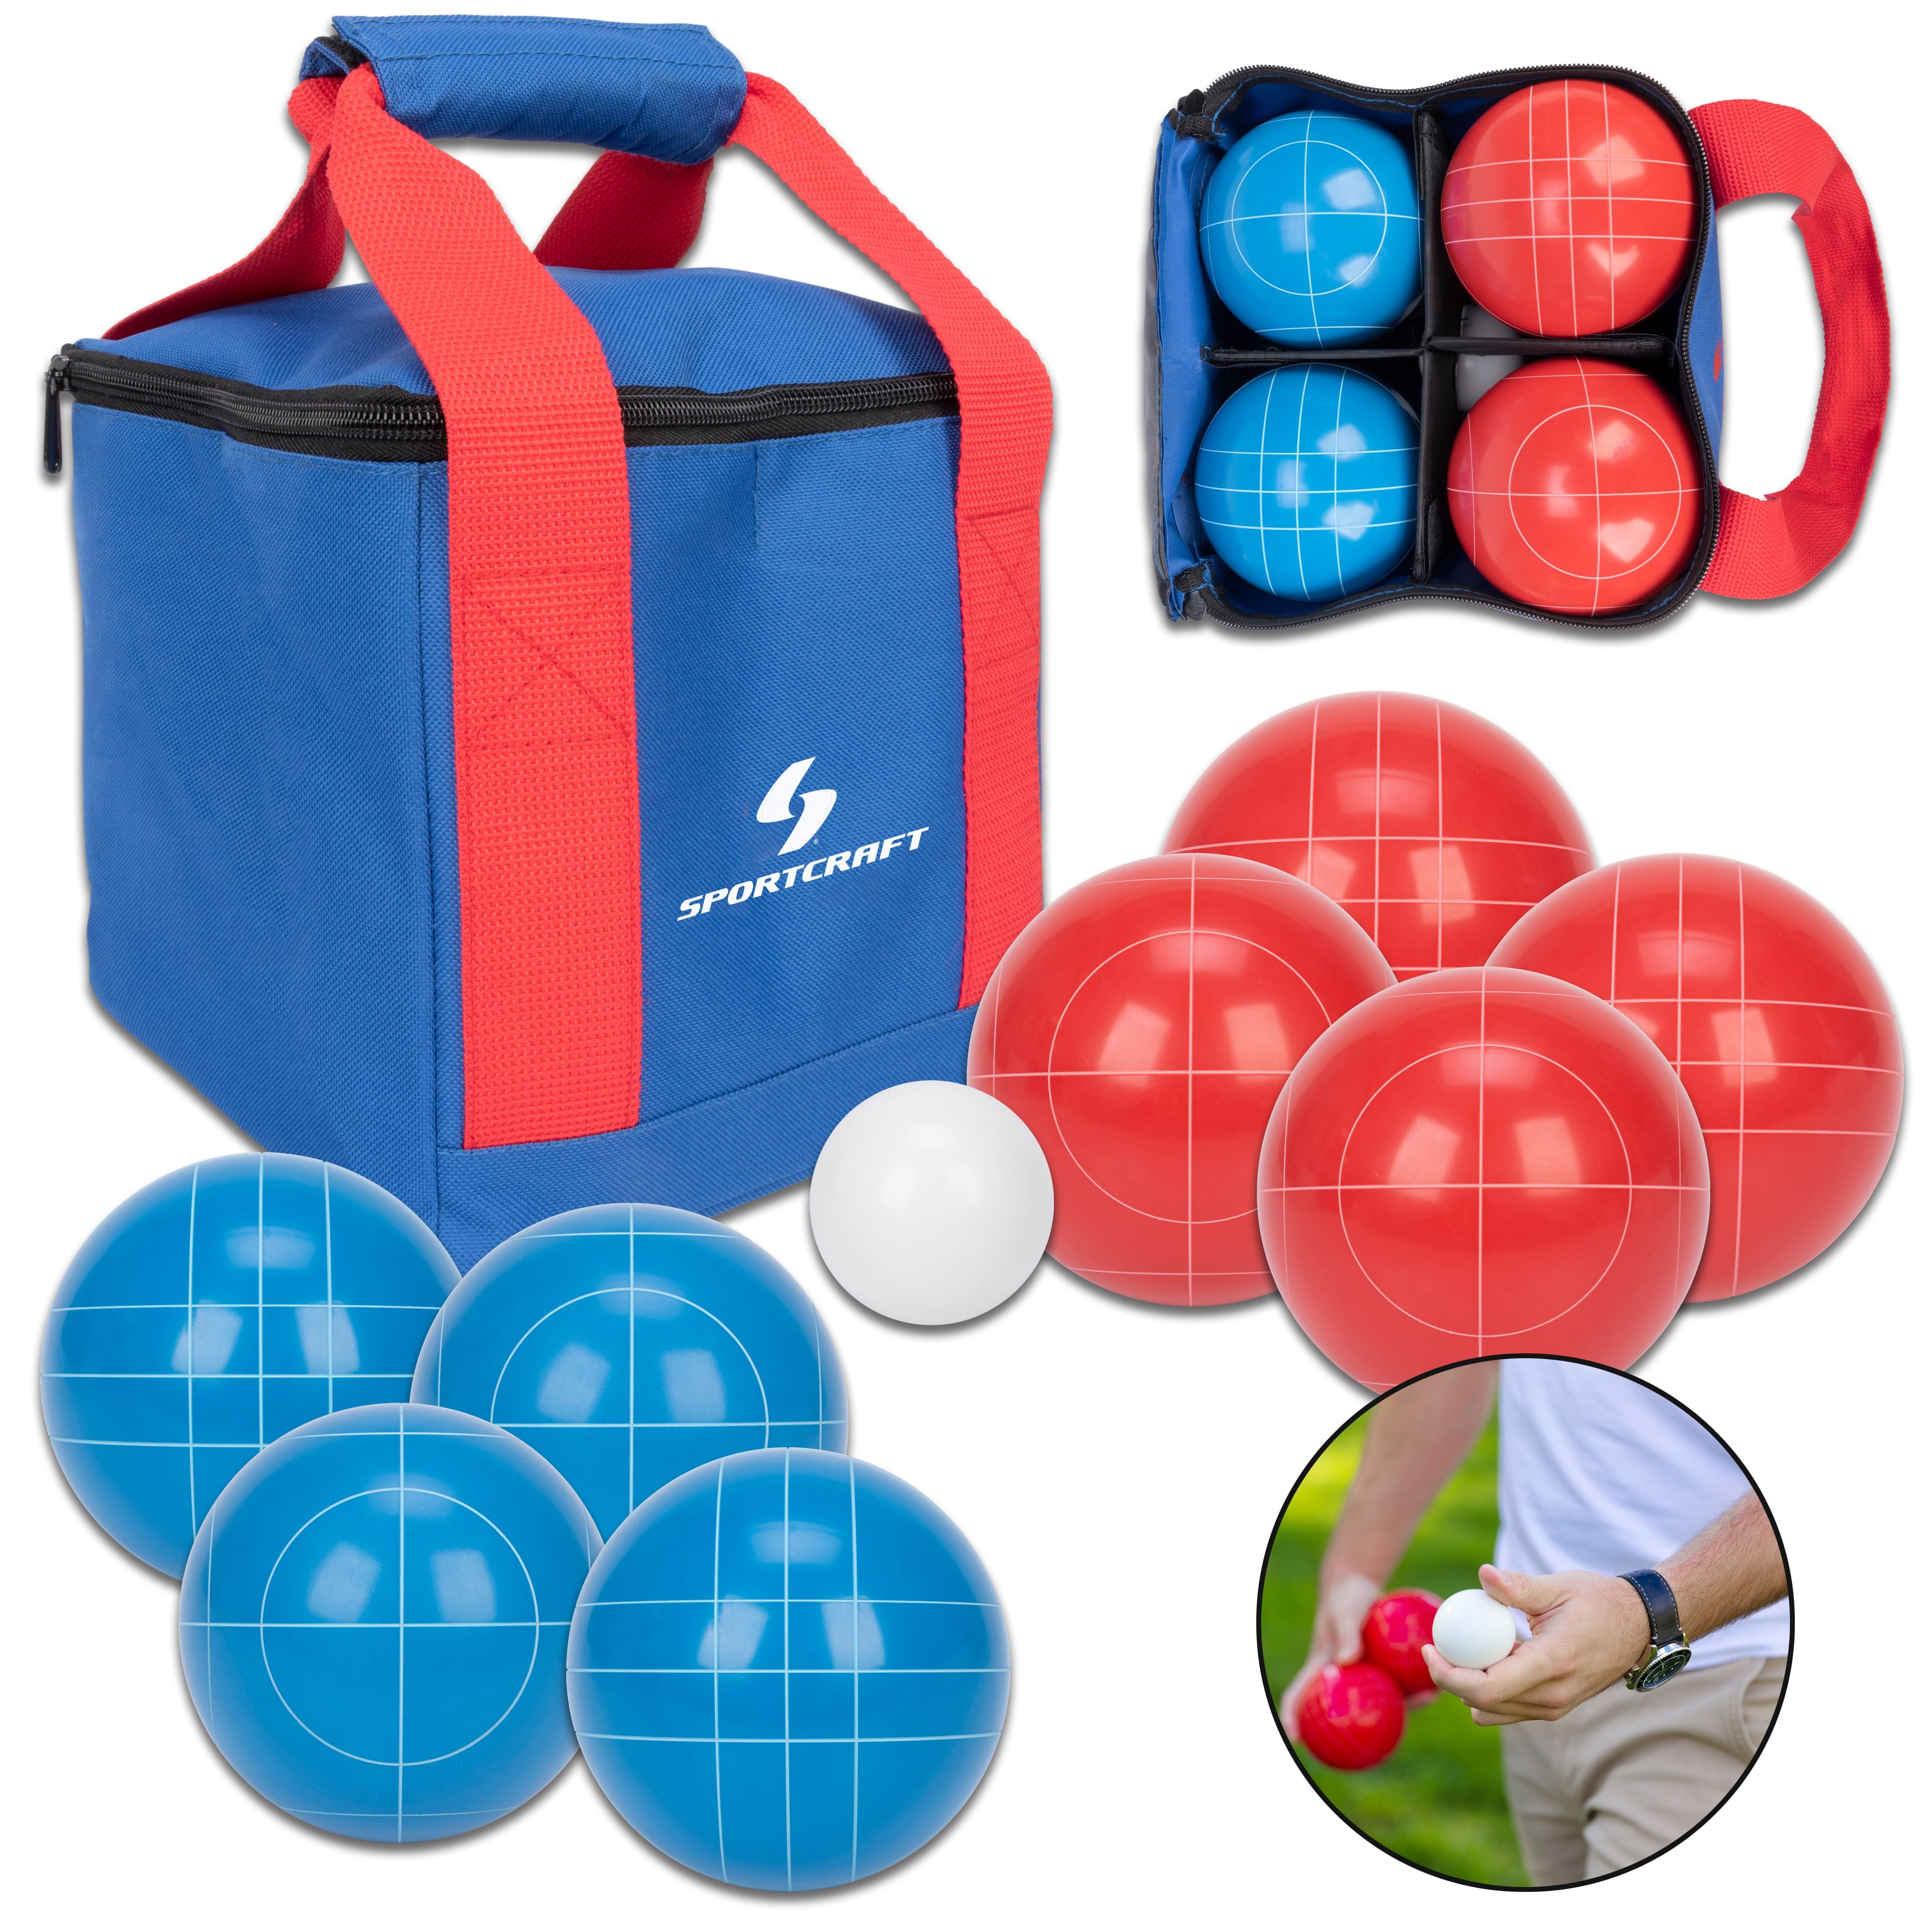  SeaTurtle Sports Rocketball Ball Slam Game Set - Includes  Reversible Wooden Target Board, Custom Carry Case, 2 Balls & Rules : Toys &  Games